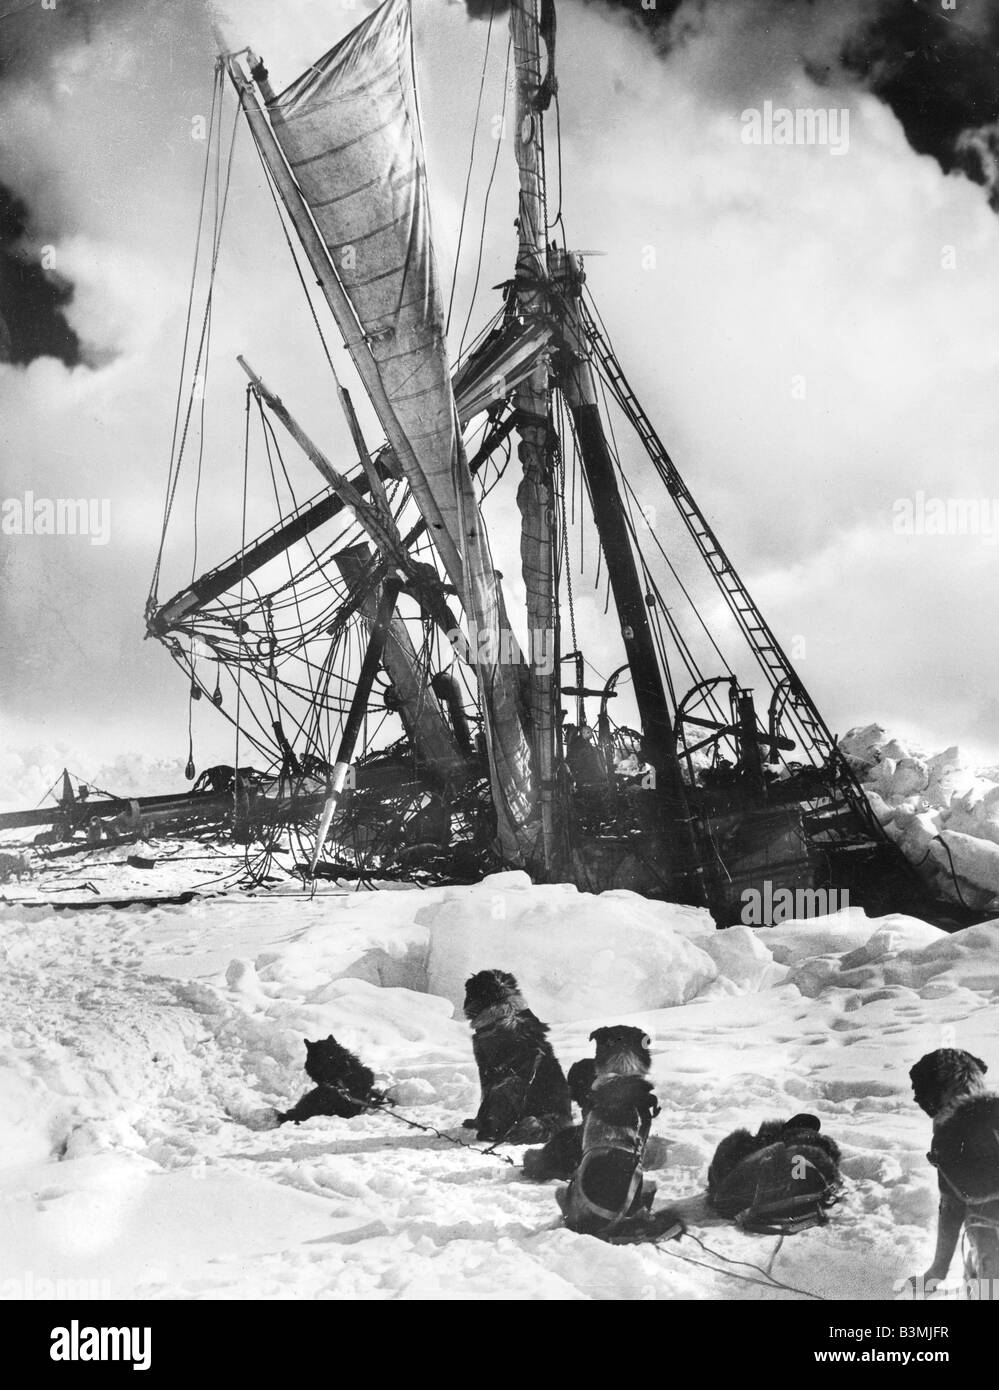 SIE ERNEST SHACKLETON's ship The Endurance is finally crushed by ice in 1914. Photo: Frank Hurley Photo Alamy